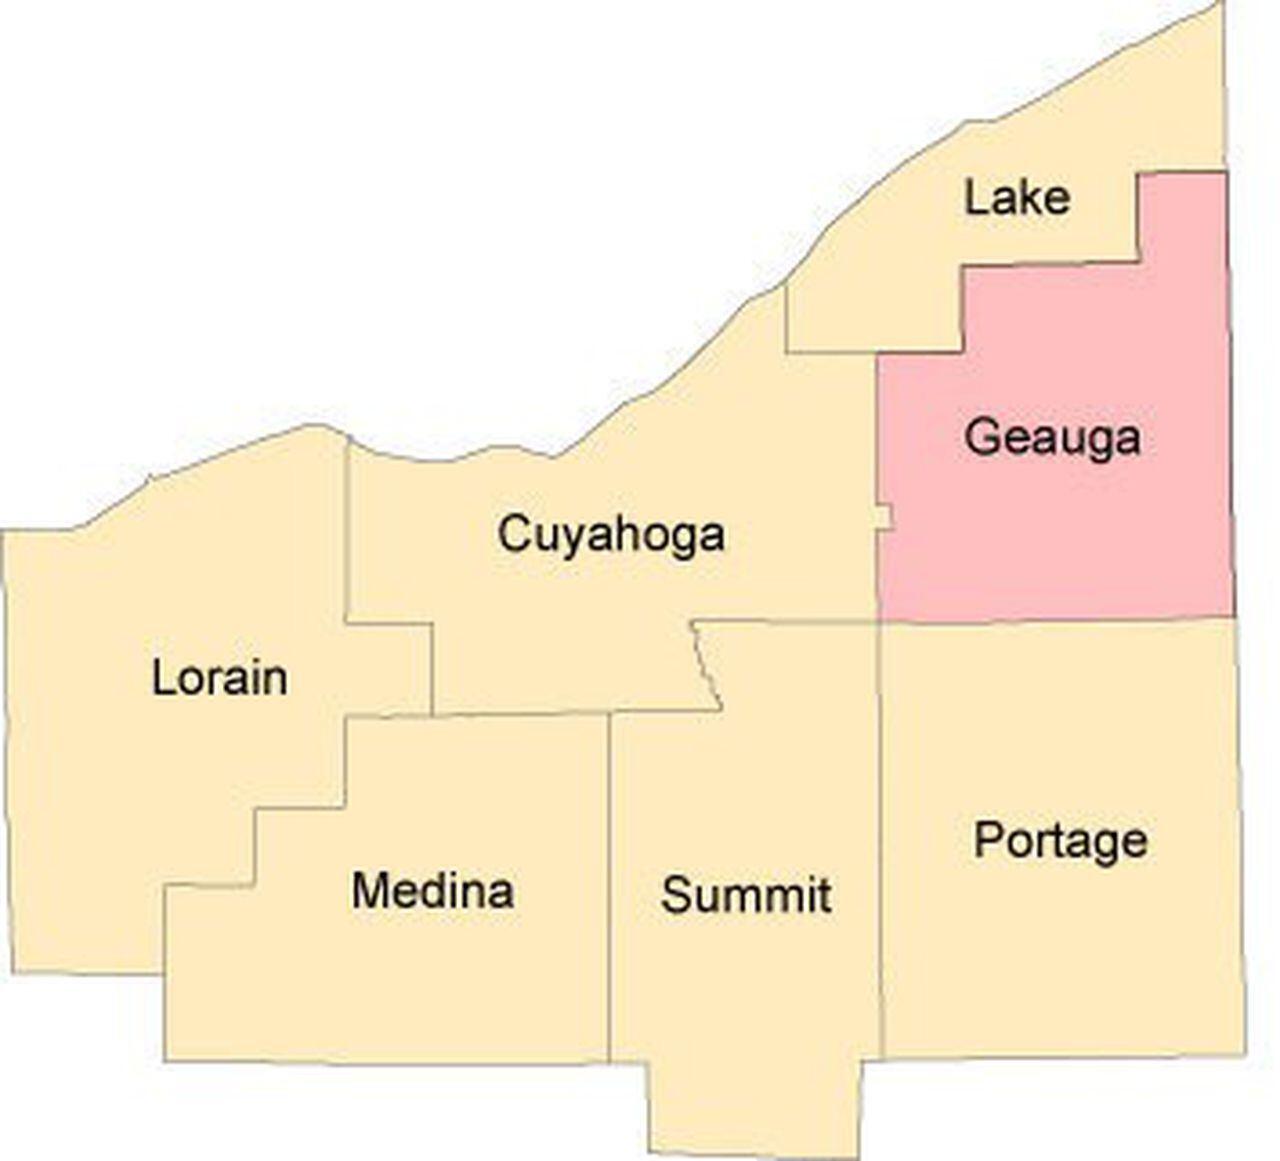 Understanding the Impact of the 9 Million Tax Levy on Geauga County